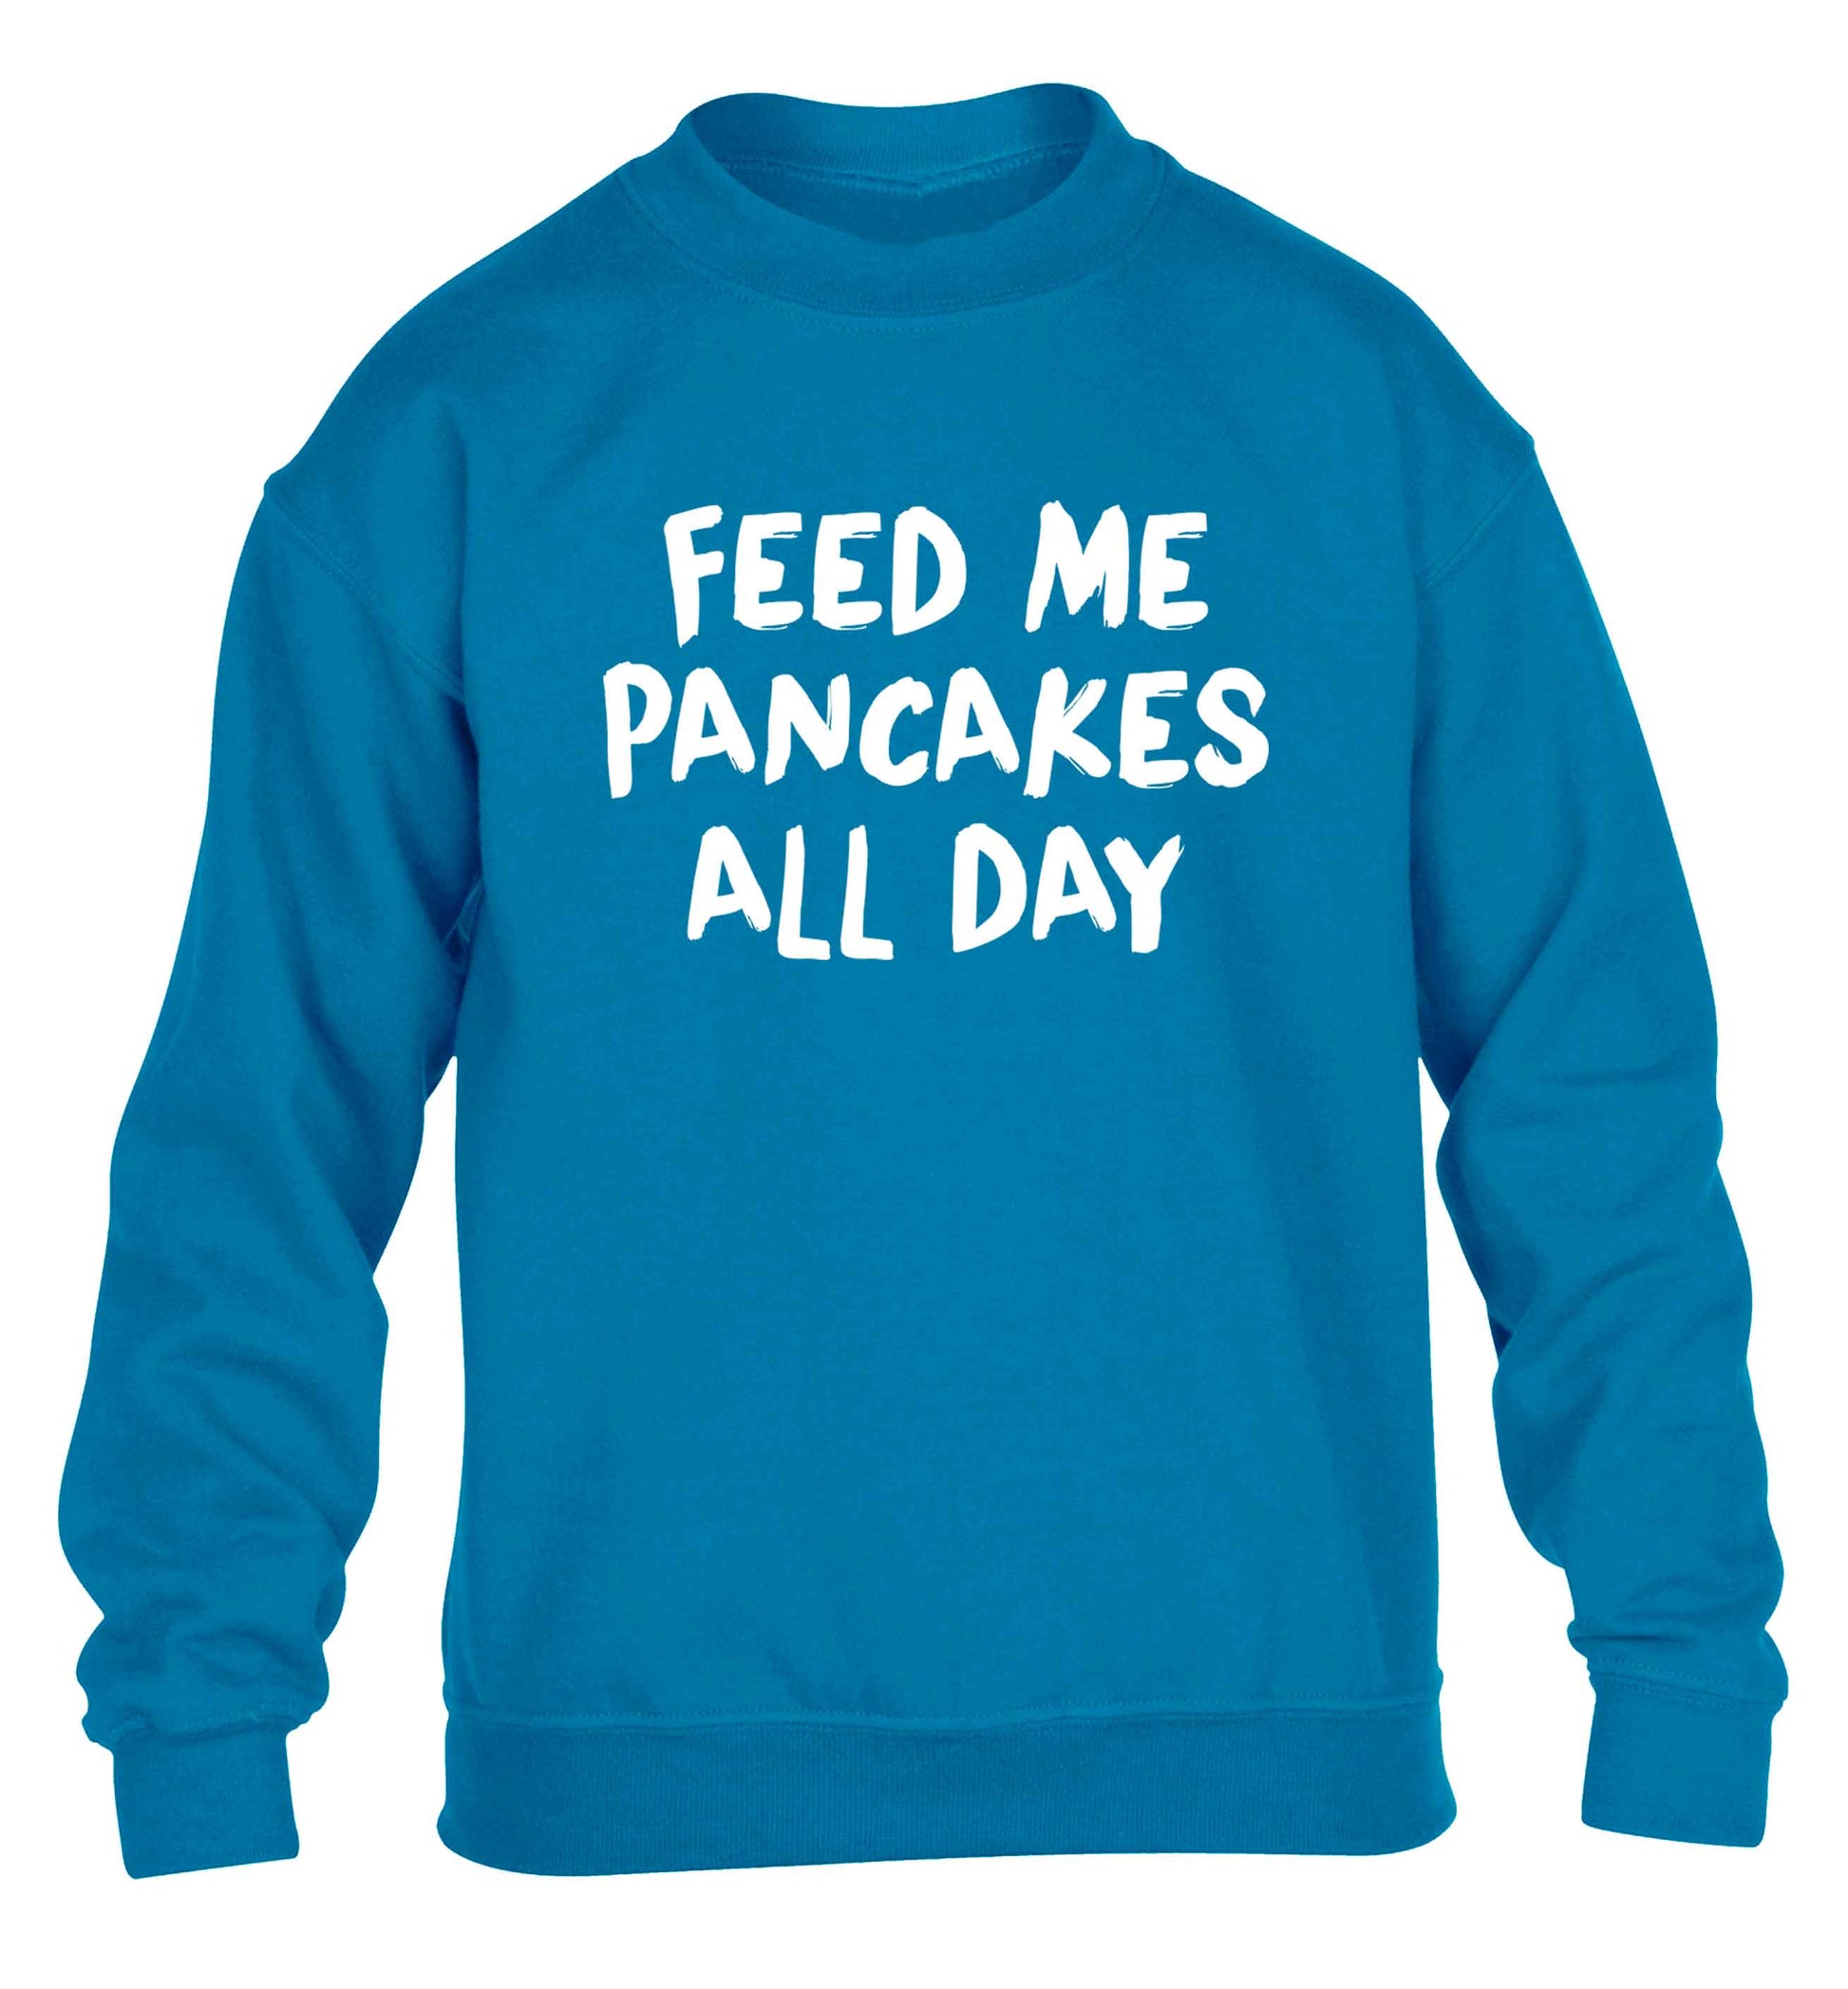 Feed me pancakes all day children's blue sweater 12-13 Years